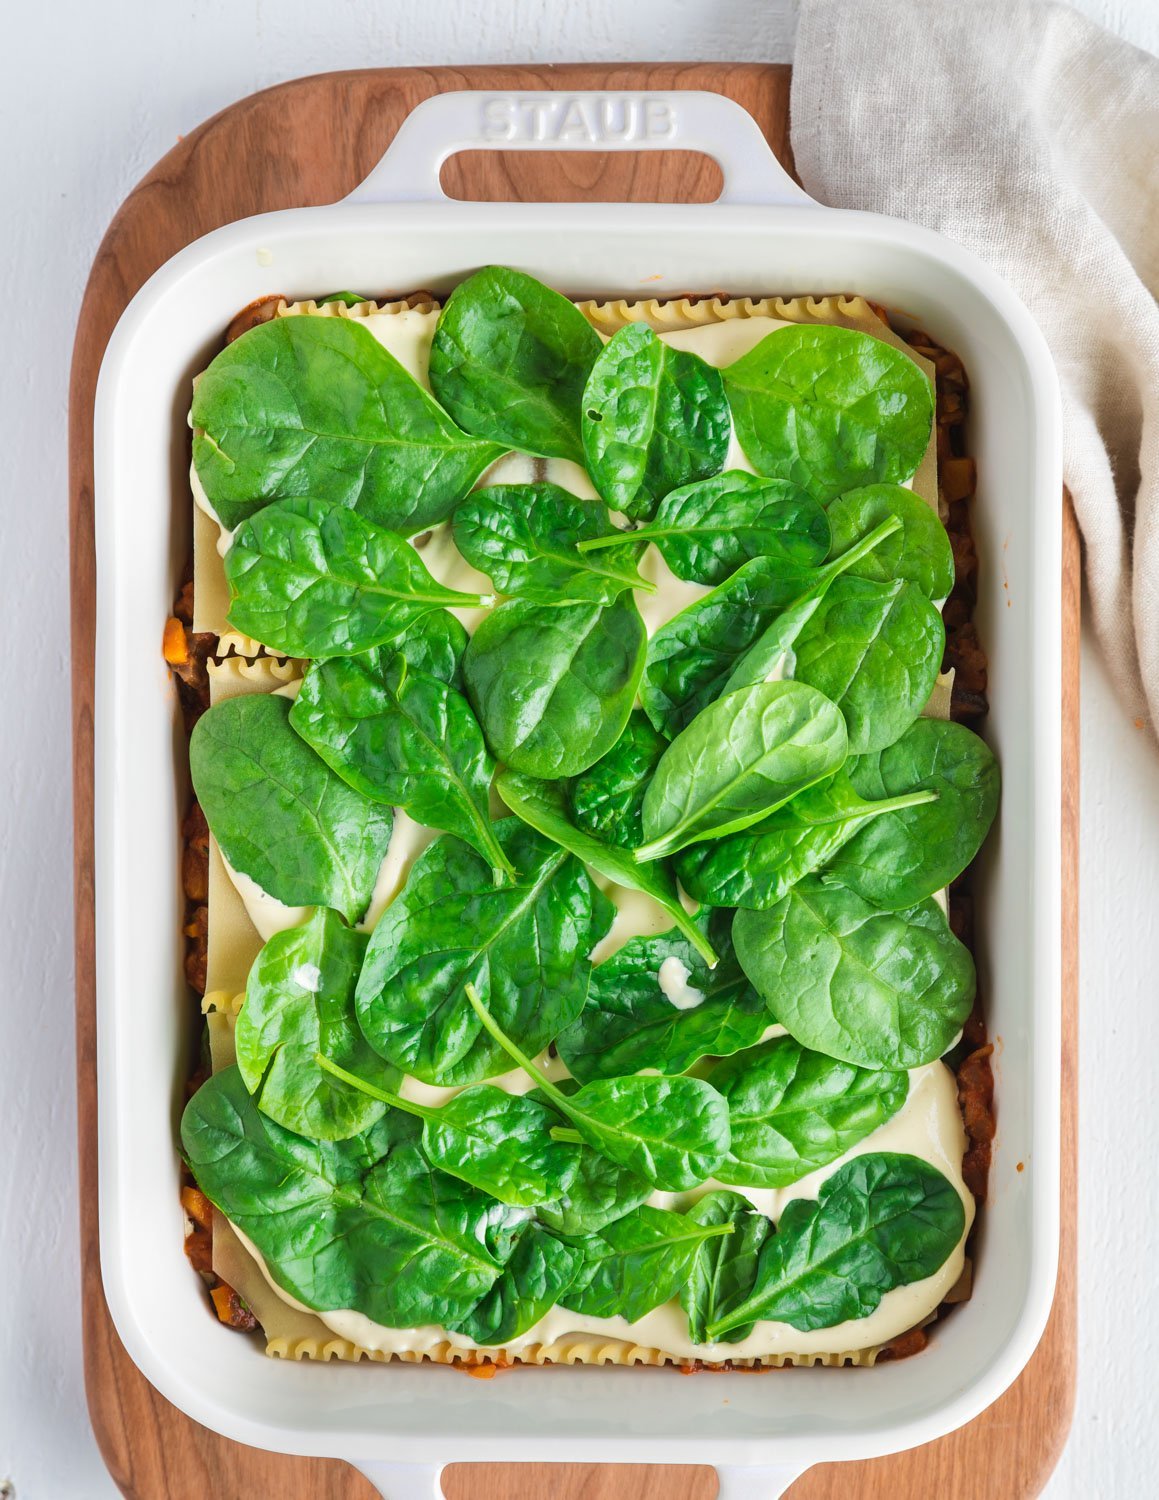 Spinach layer.